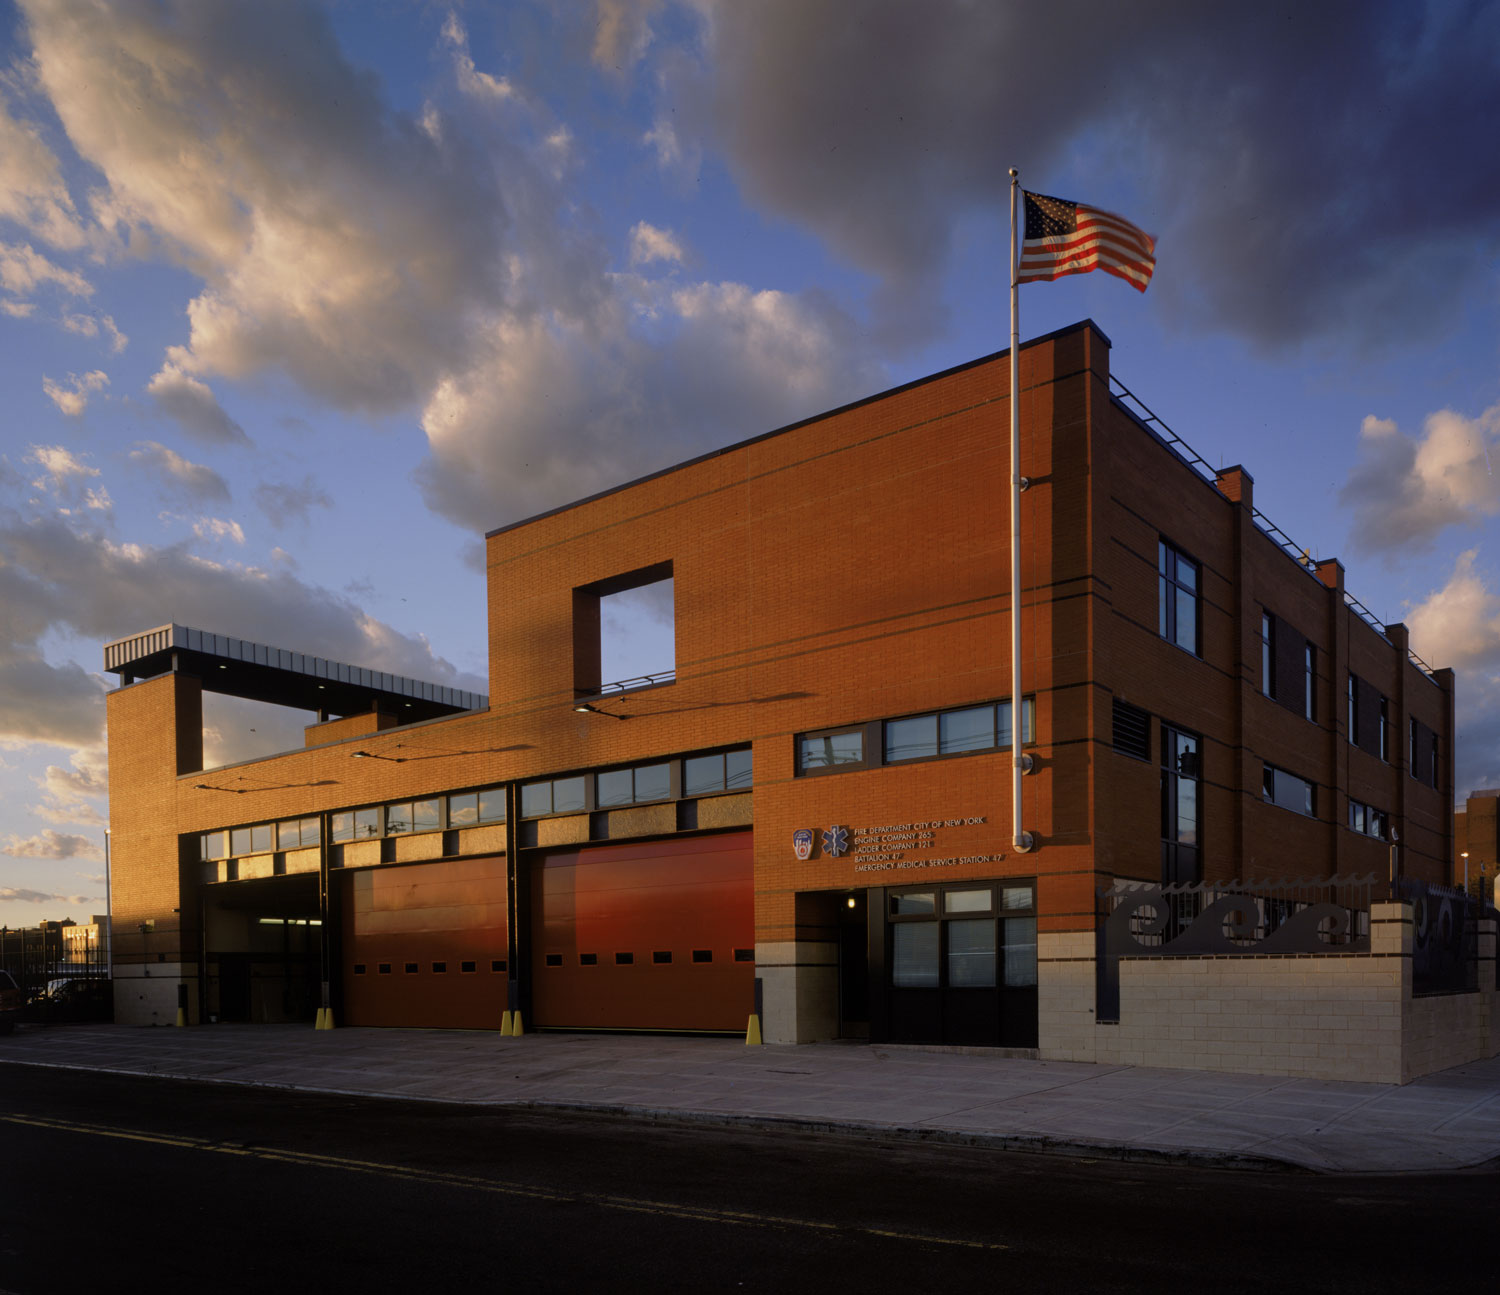 FDNY Fire and EMS Station
-Queens, NY